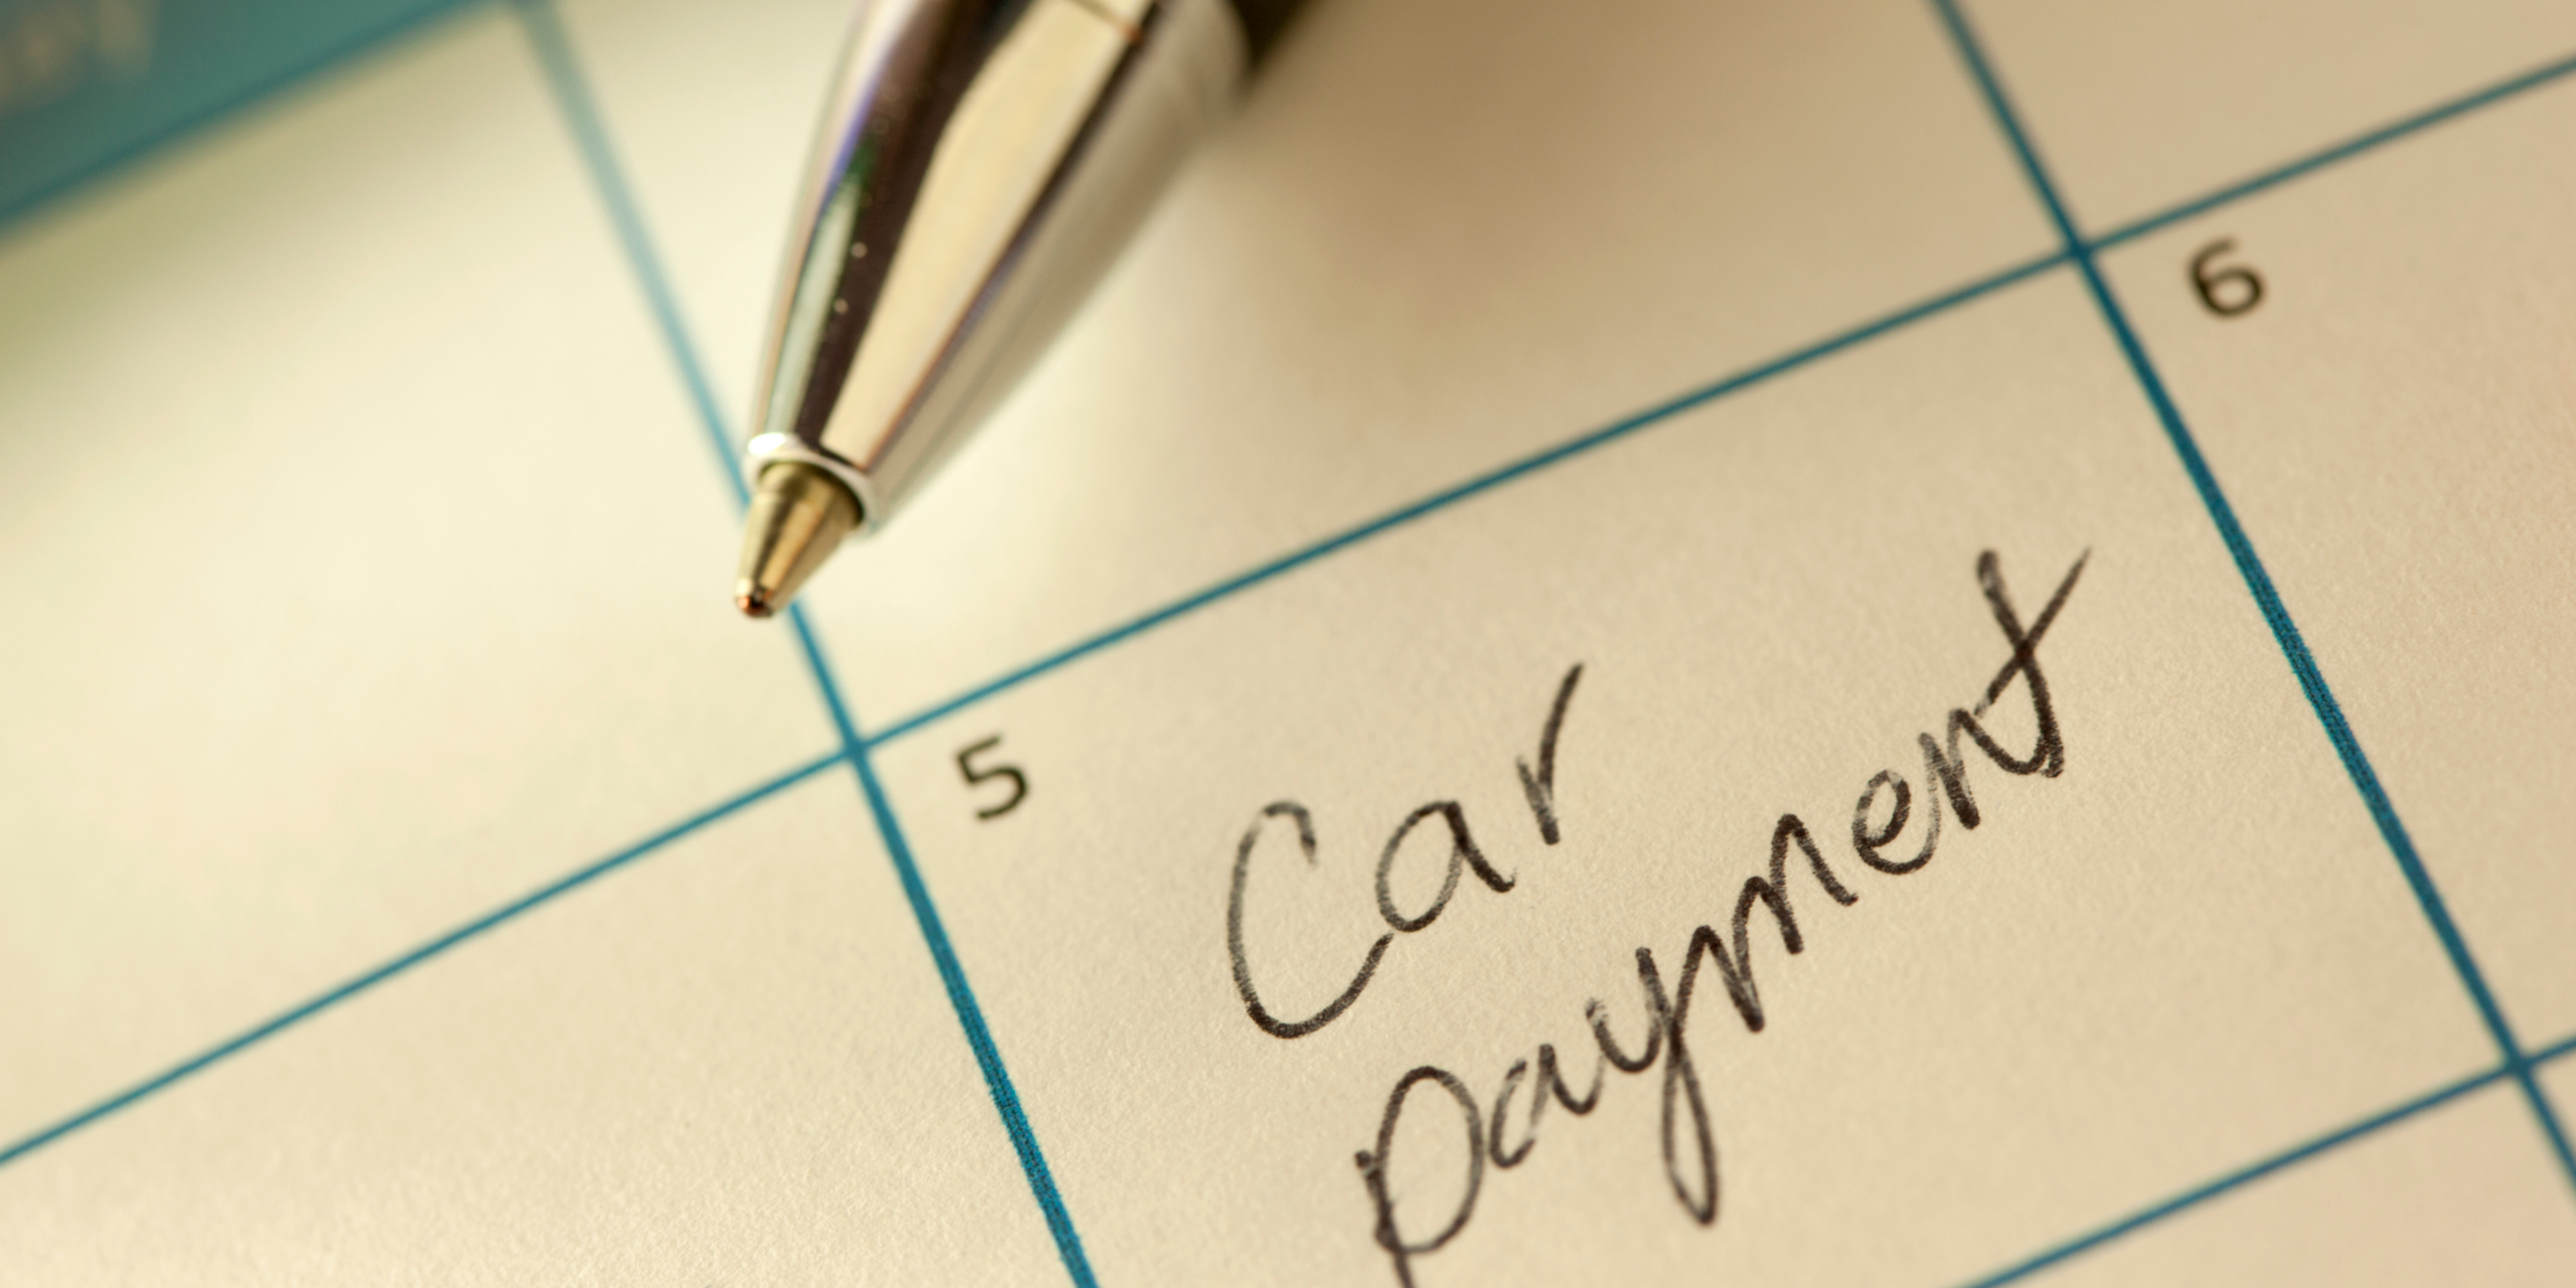 What Are the Costs That Come With an Auto Loan?